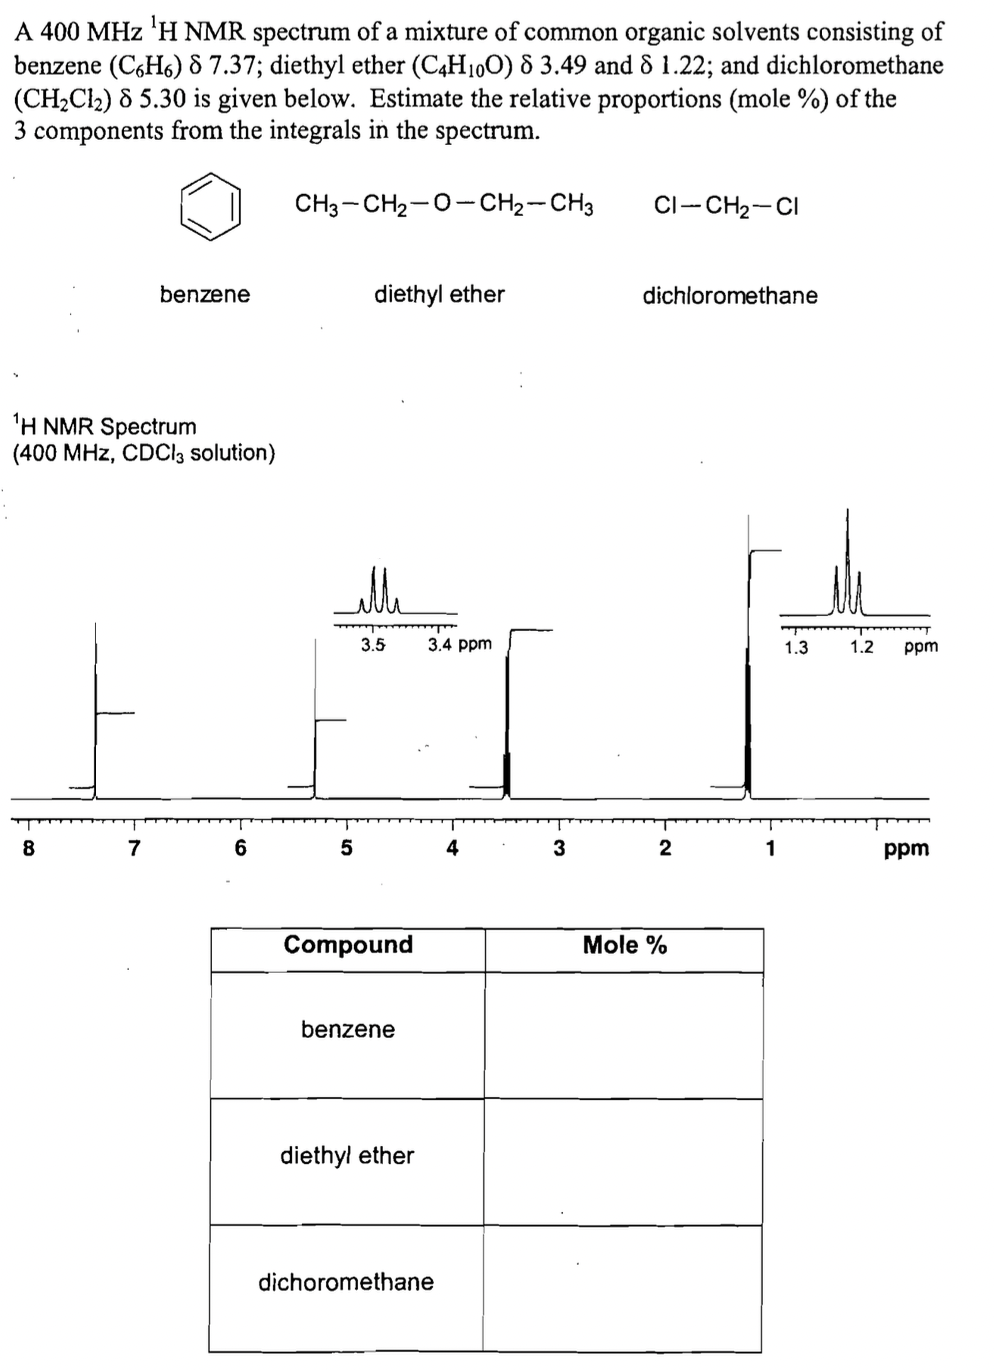 A 400 MHz 'H NMR spectrum of a mixture of common organic solvents consisting of
benzene (C,H6) 8 7.37; diethyl ether (C4H100) 8 3.49 and 8 1.22; and dichloromethane
(CH2Cl2) 8 5.30 is given below. Estimate the relative proportions (mole %) of the
3 components from the integrals in the spectrum.
CH3 - CH2-0-CH2-CH3
CI-CH2-CI
benzene
diethyl ether
dichloromethane
'H NMR Spectrum
(400 MHz, CDCI; solution)
lle
3.5
3.4 ppm
1.3
1.2
ppm
8
7
4
3
1
ppm
Compound
Mole %
benzene
diethyl ether
dichoromethane
